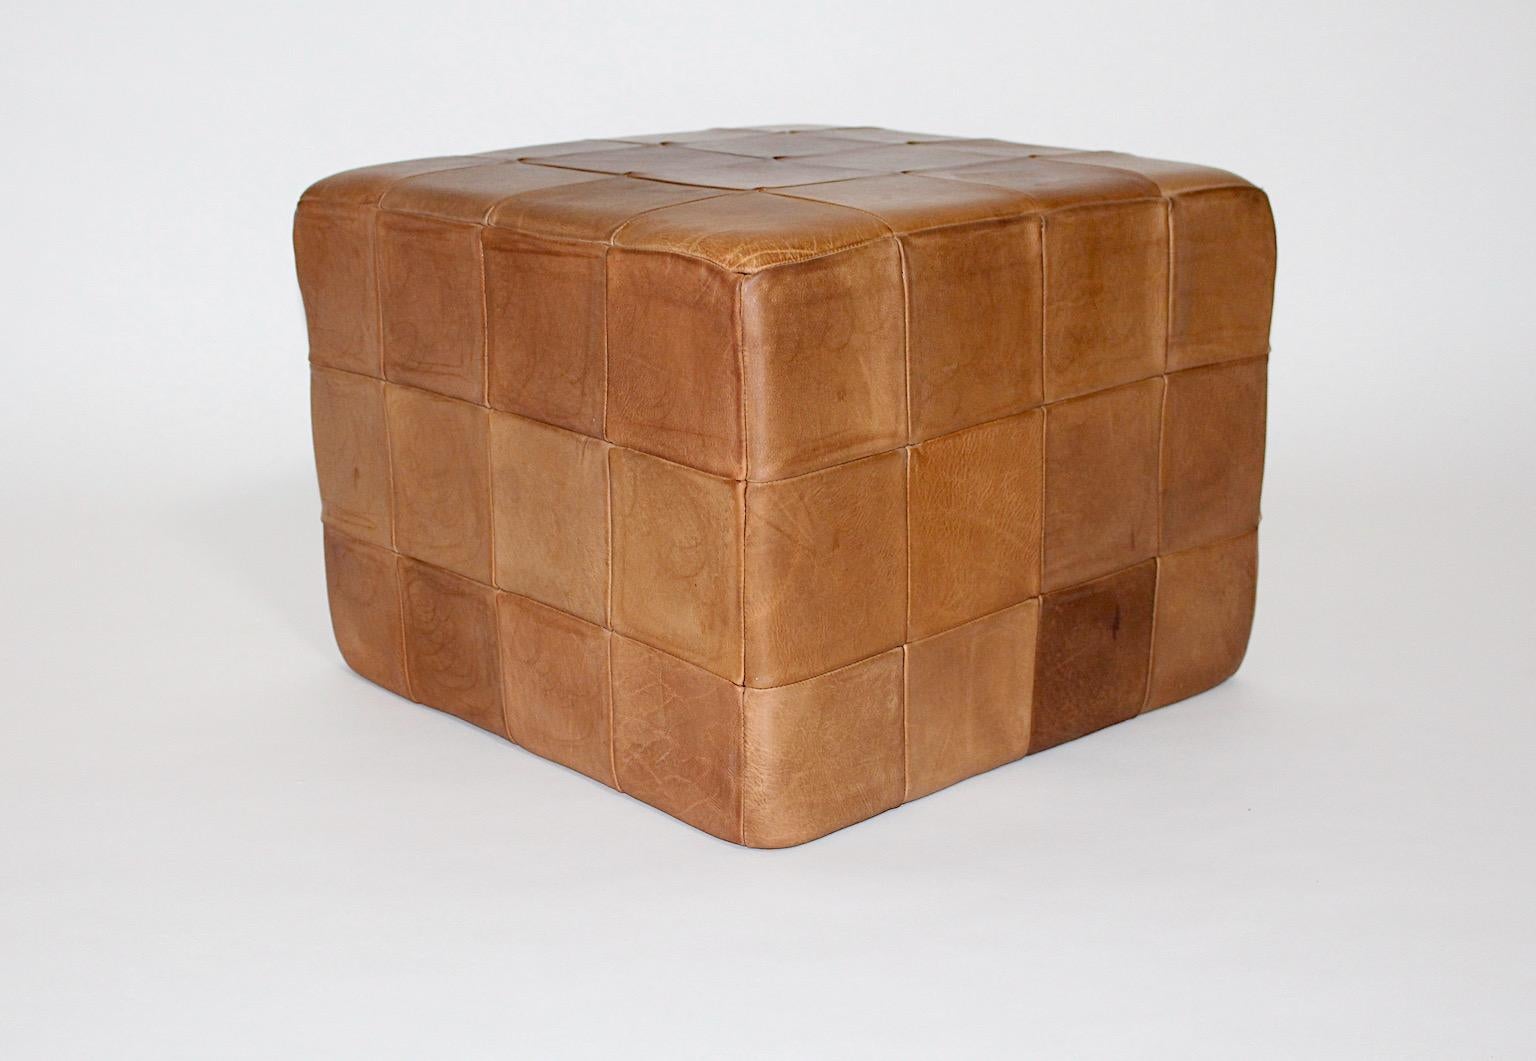 Modernist Organic Vintage Brown Patchwork Leather Cubus Stool DeSede 1970s For Sale 12